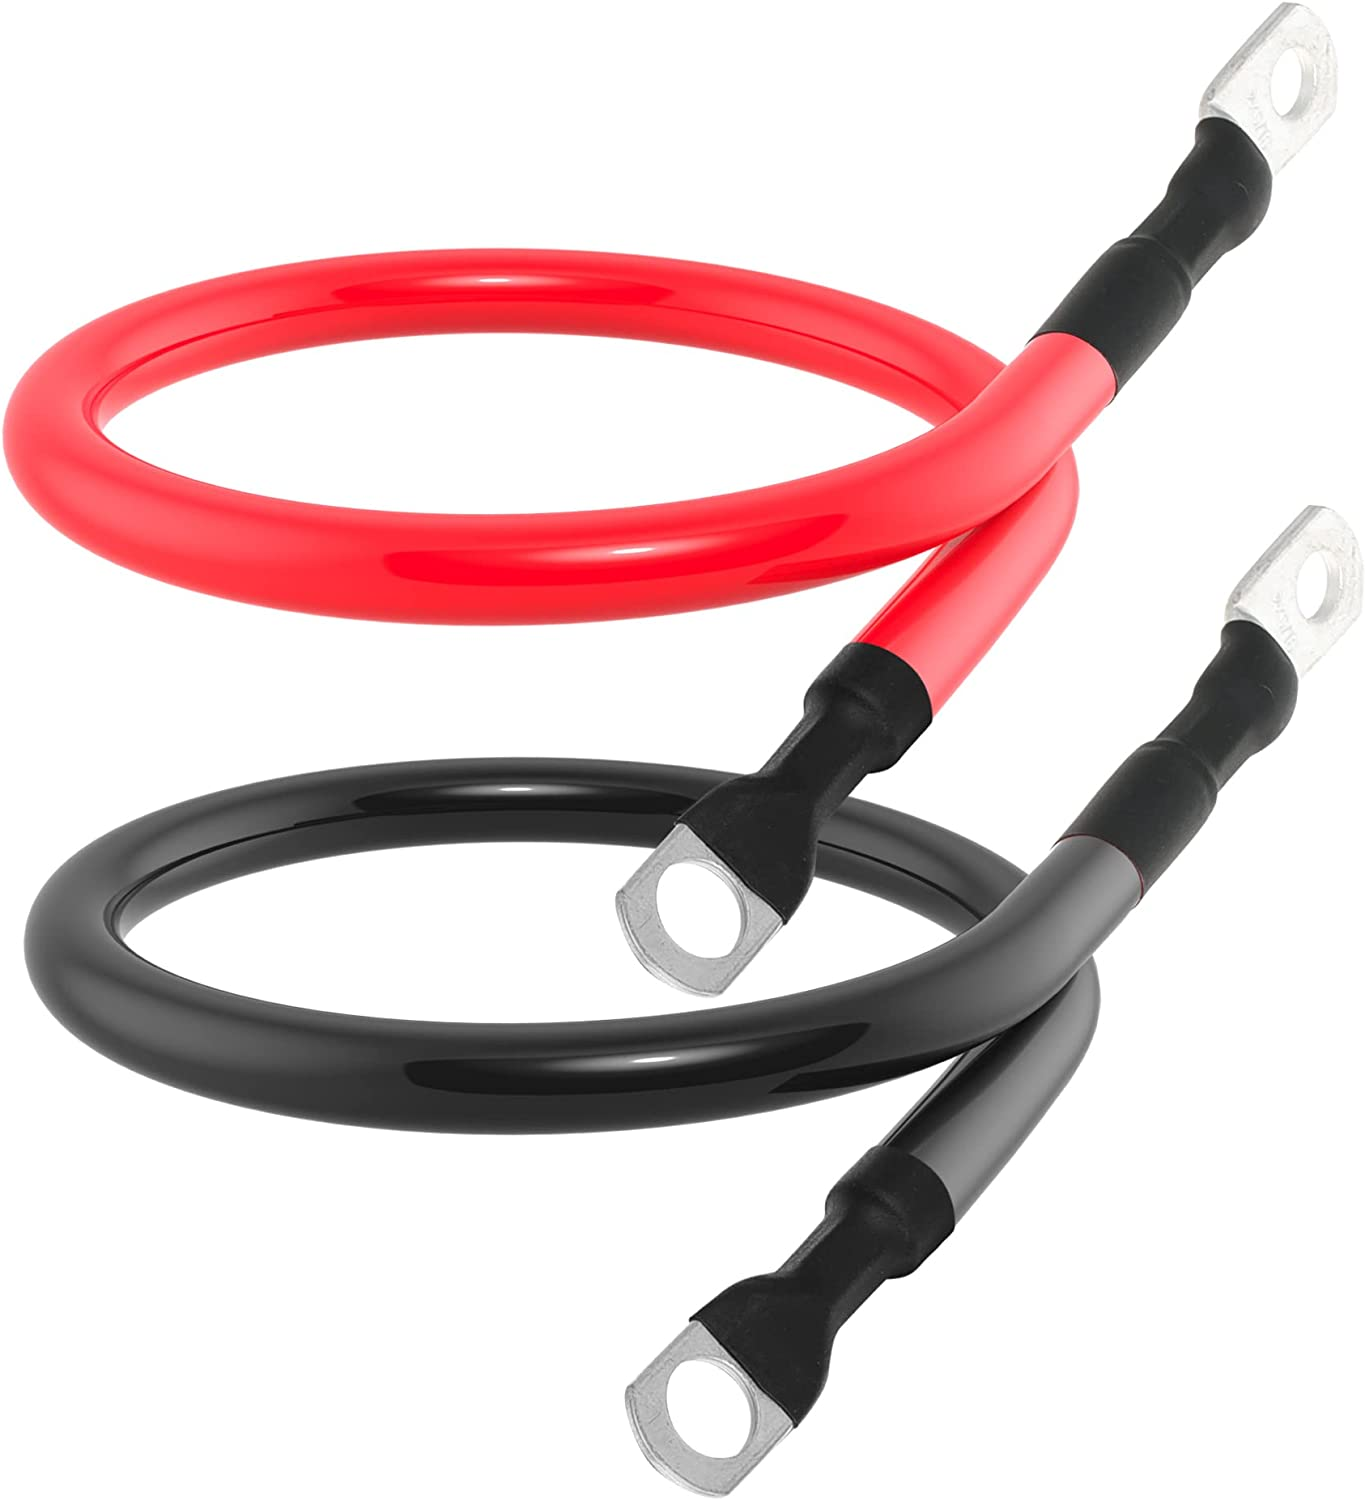 Rocksolar 12-inch 3AWG Battery Interconnect Cable Set